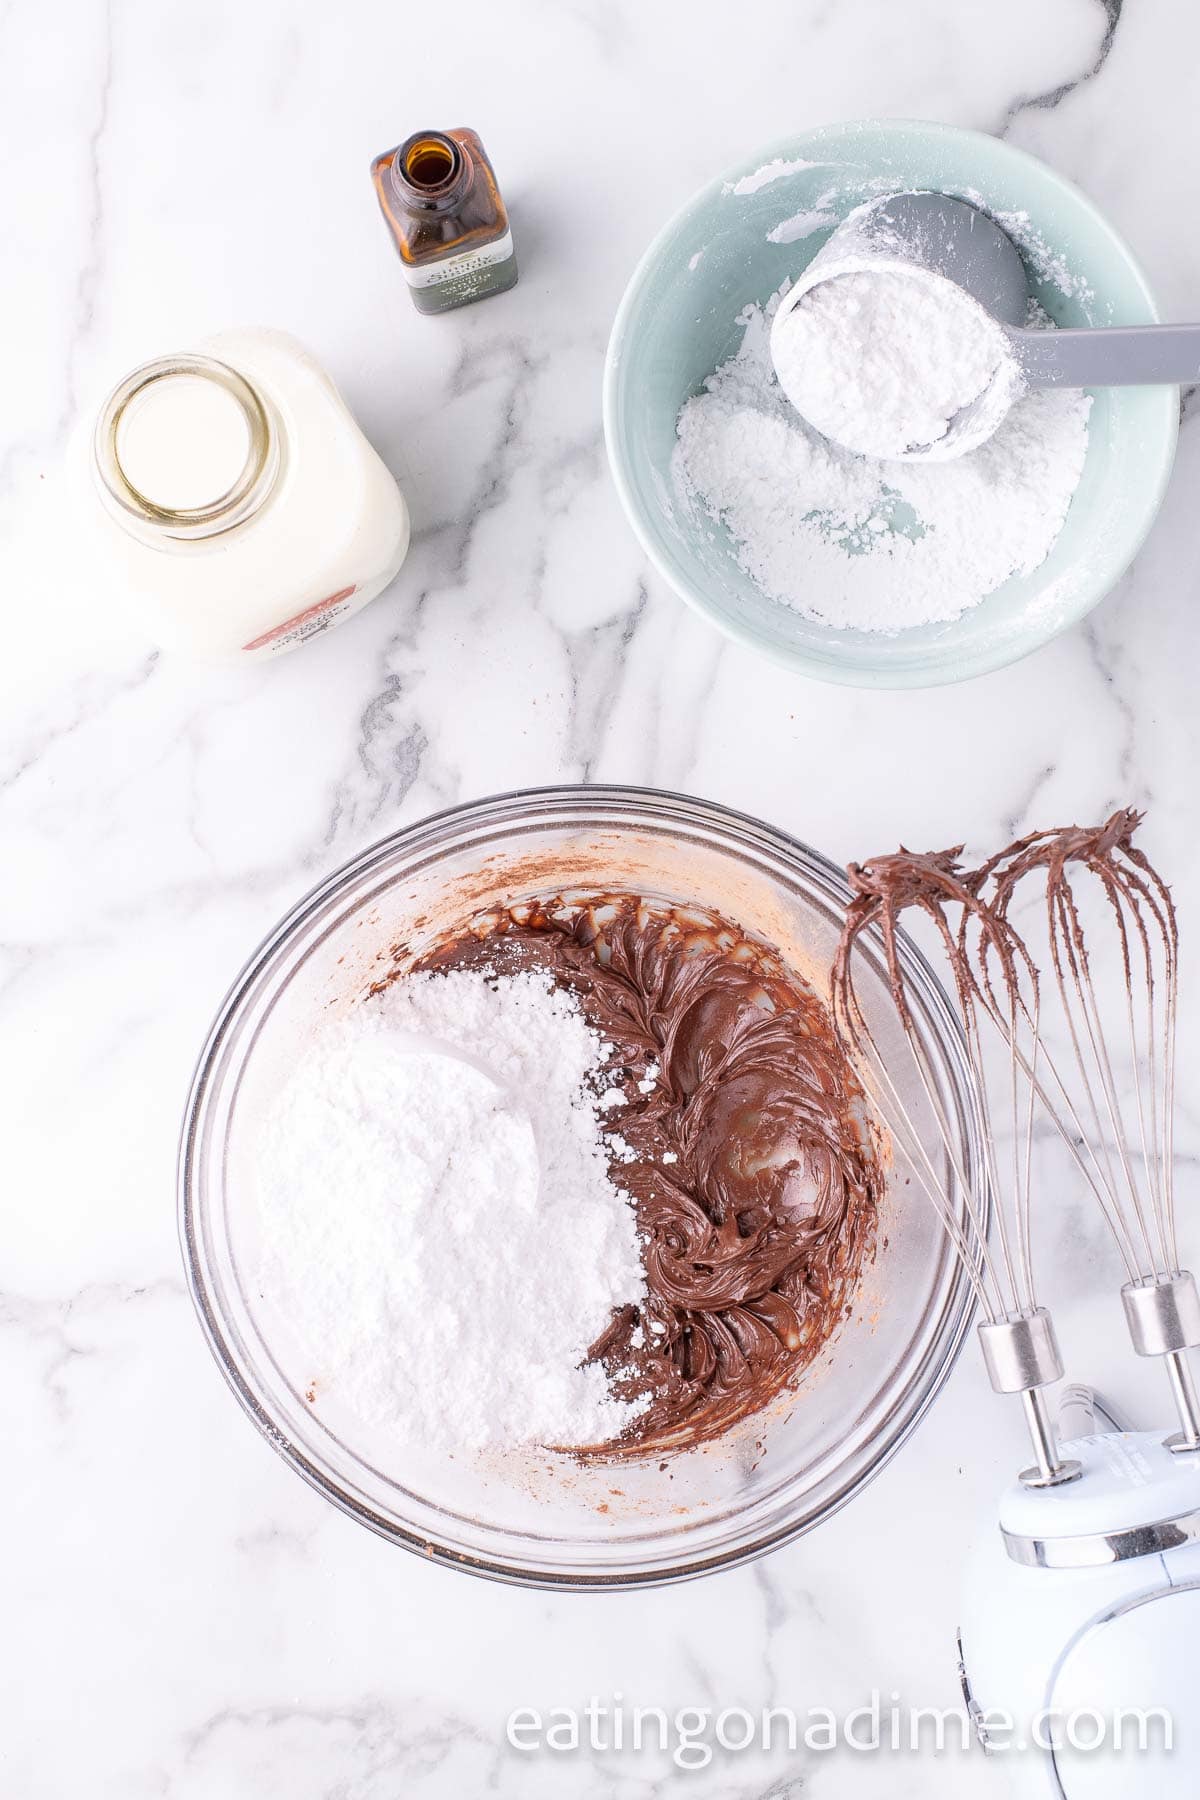 Mixing in powdered sugar into the cocoa powdered mixture